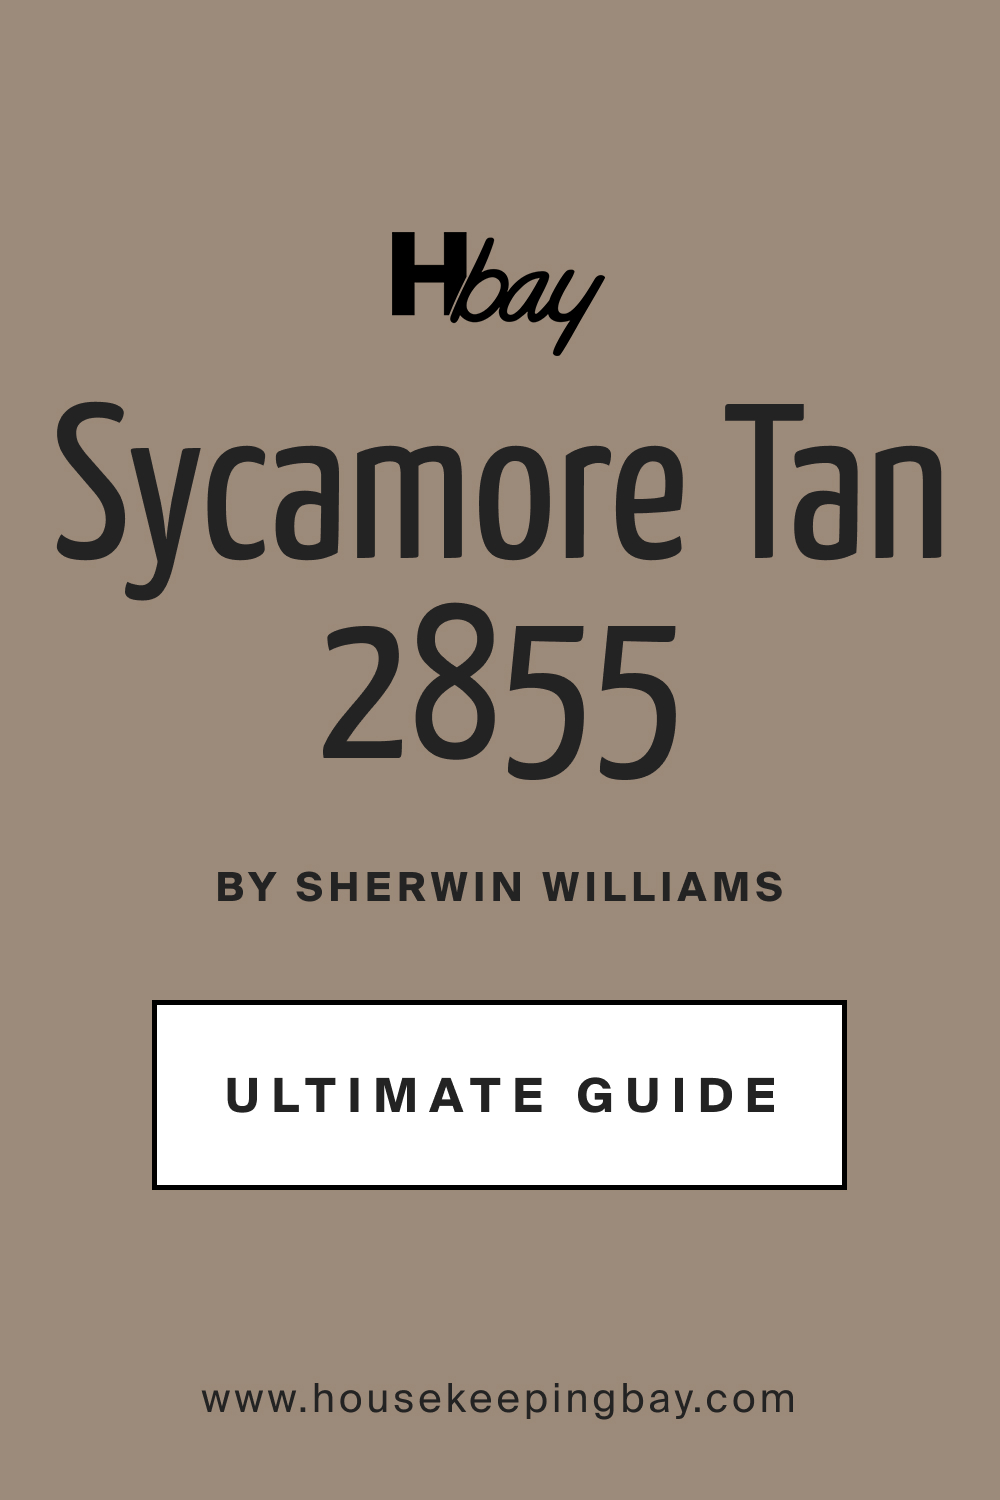 SW 2855 Sycamore Tan by Sherwin Williams Ultimate Guide